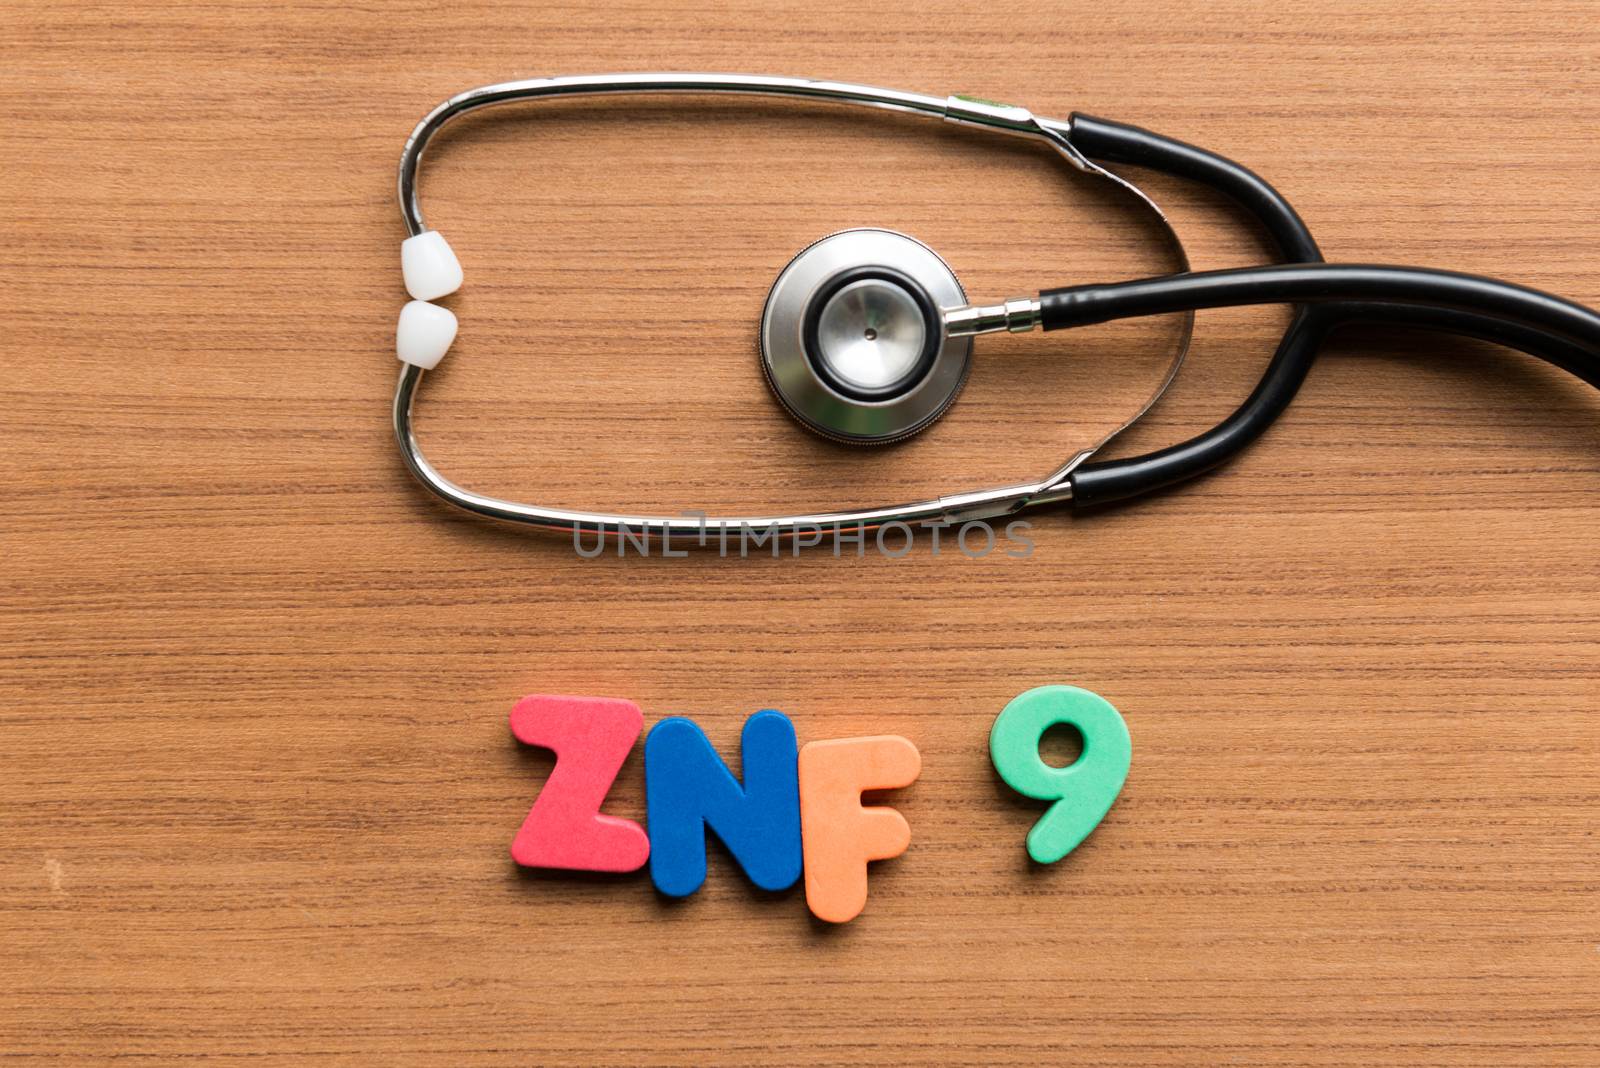 znf 9 colorful word with stethoscope by sohel.parvez@hotmail.com